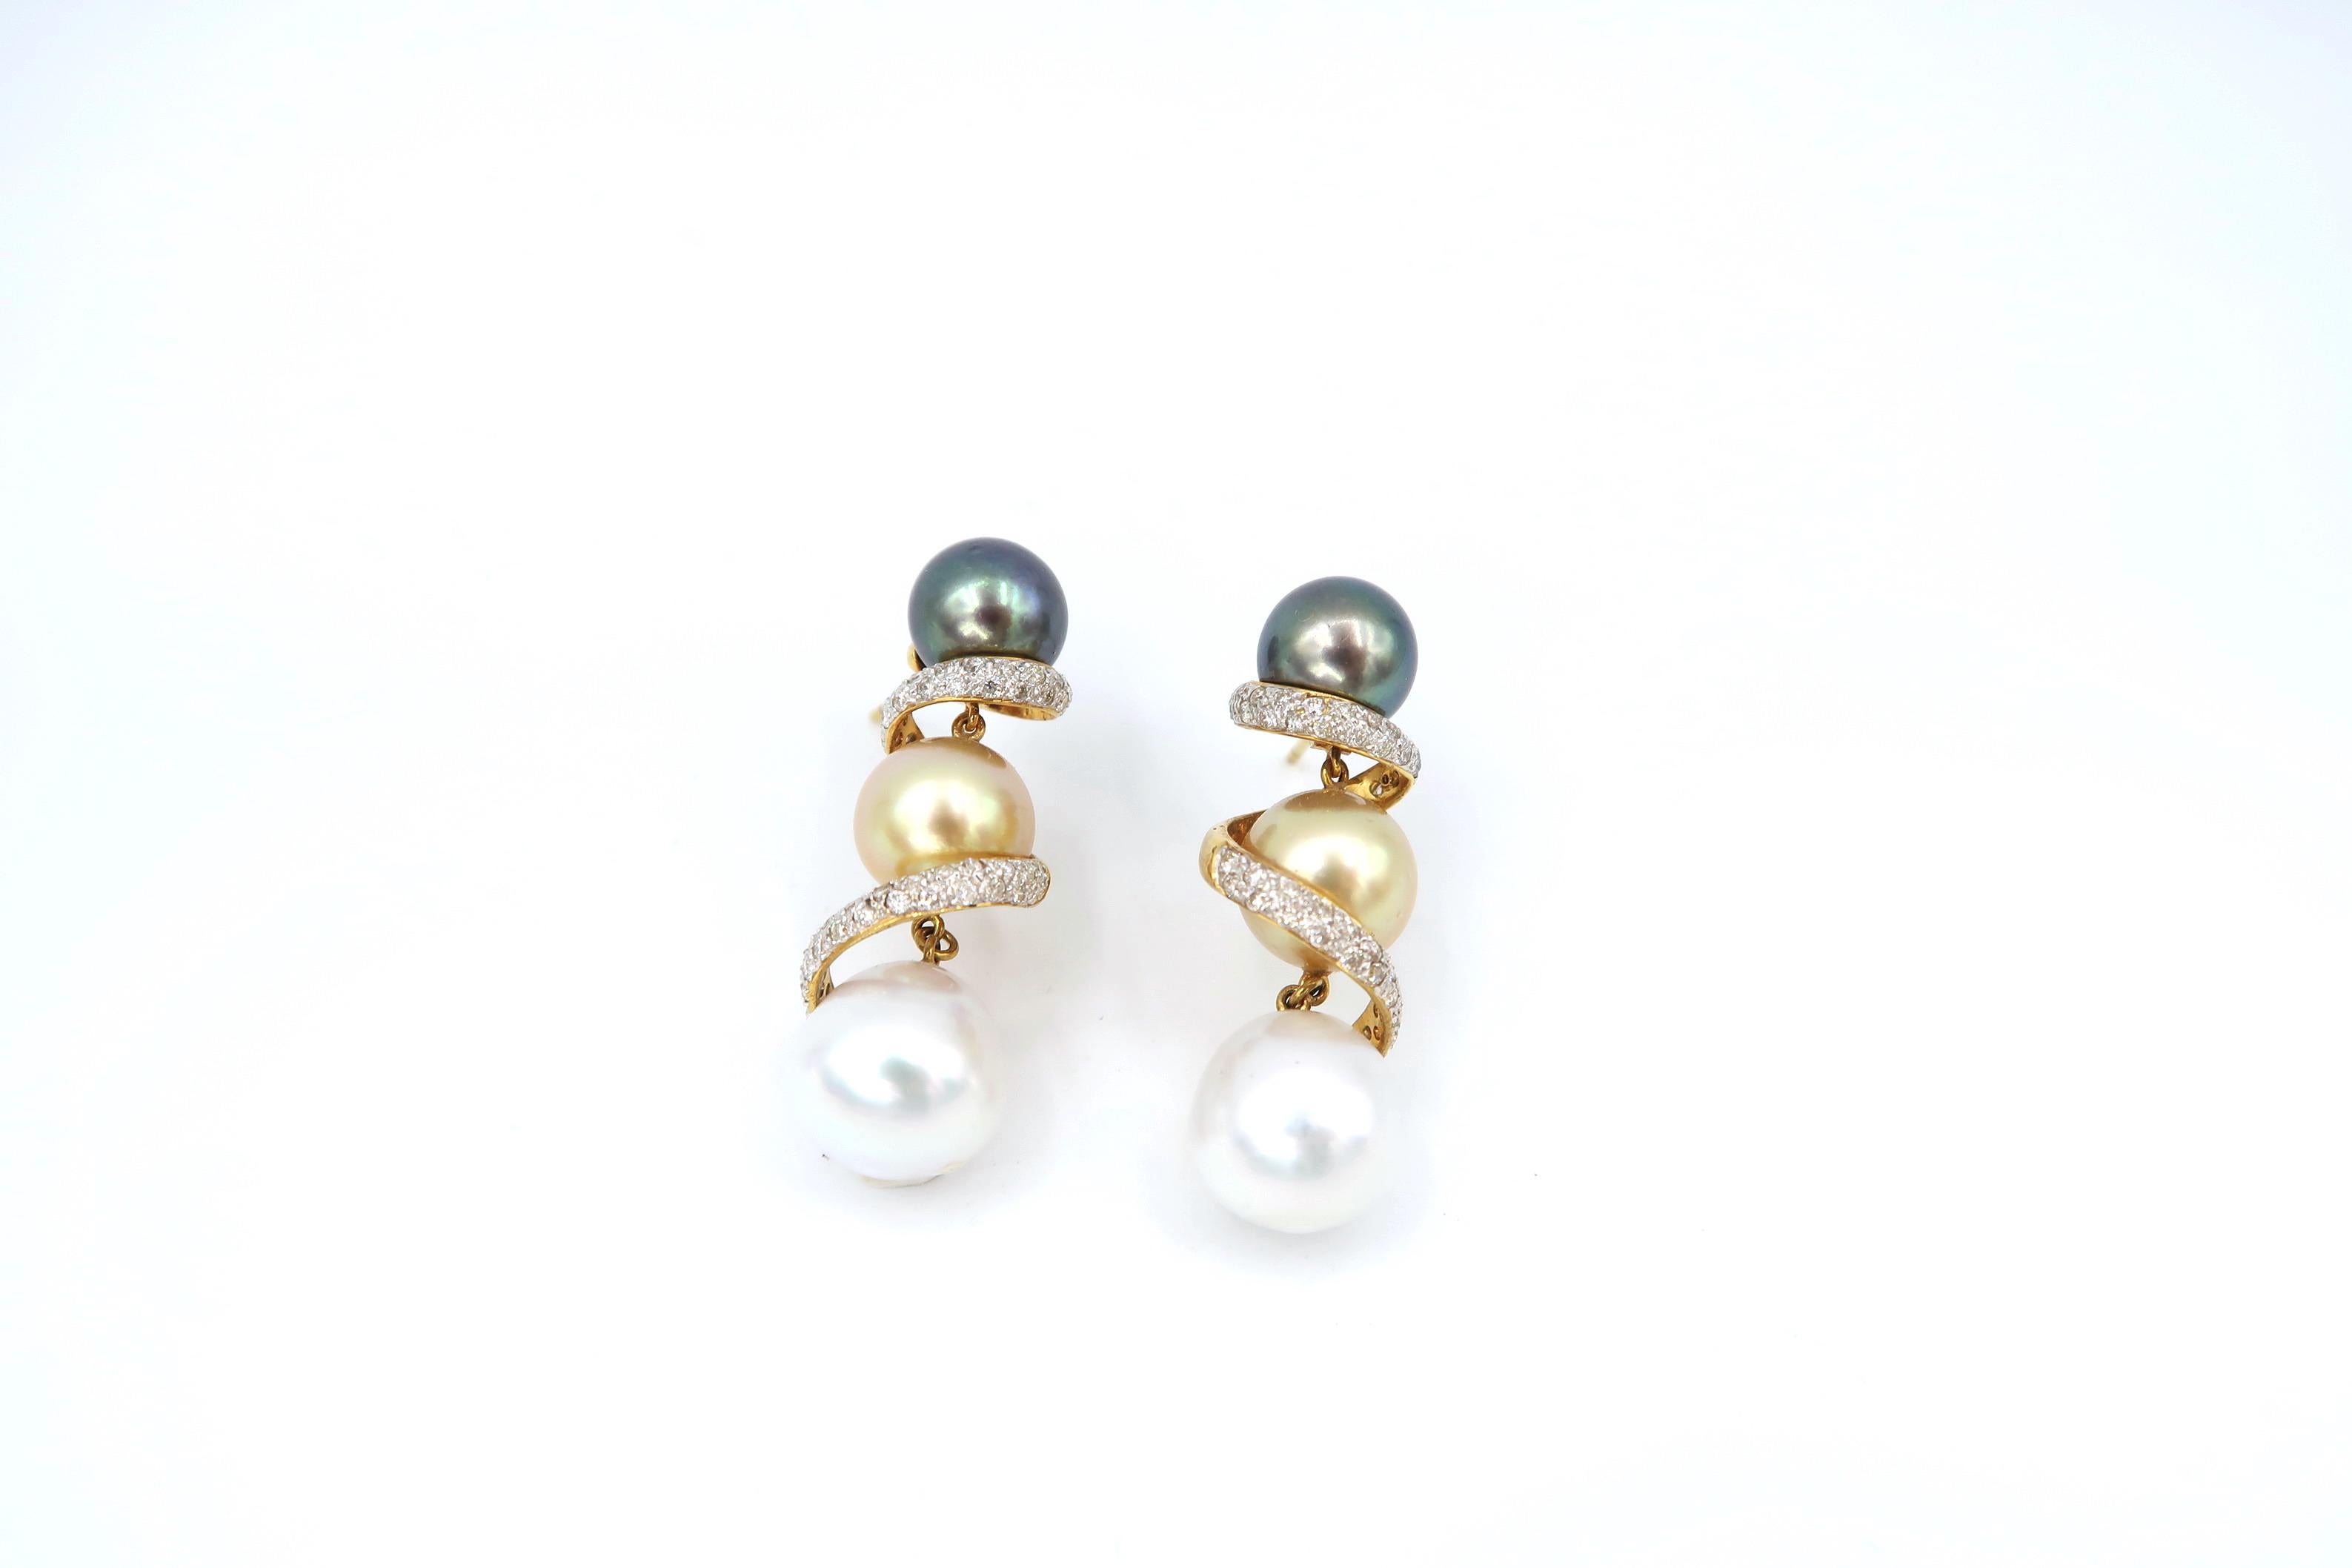 Tricolour Tahitian, Gold, and White South Sea Pearl Drop Earrings with Diamond Pavé Spiral in 18K Gold

Height: 1.5